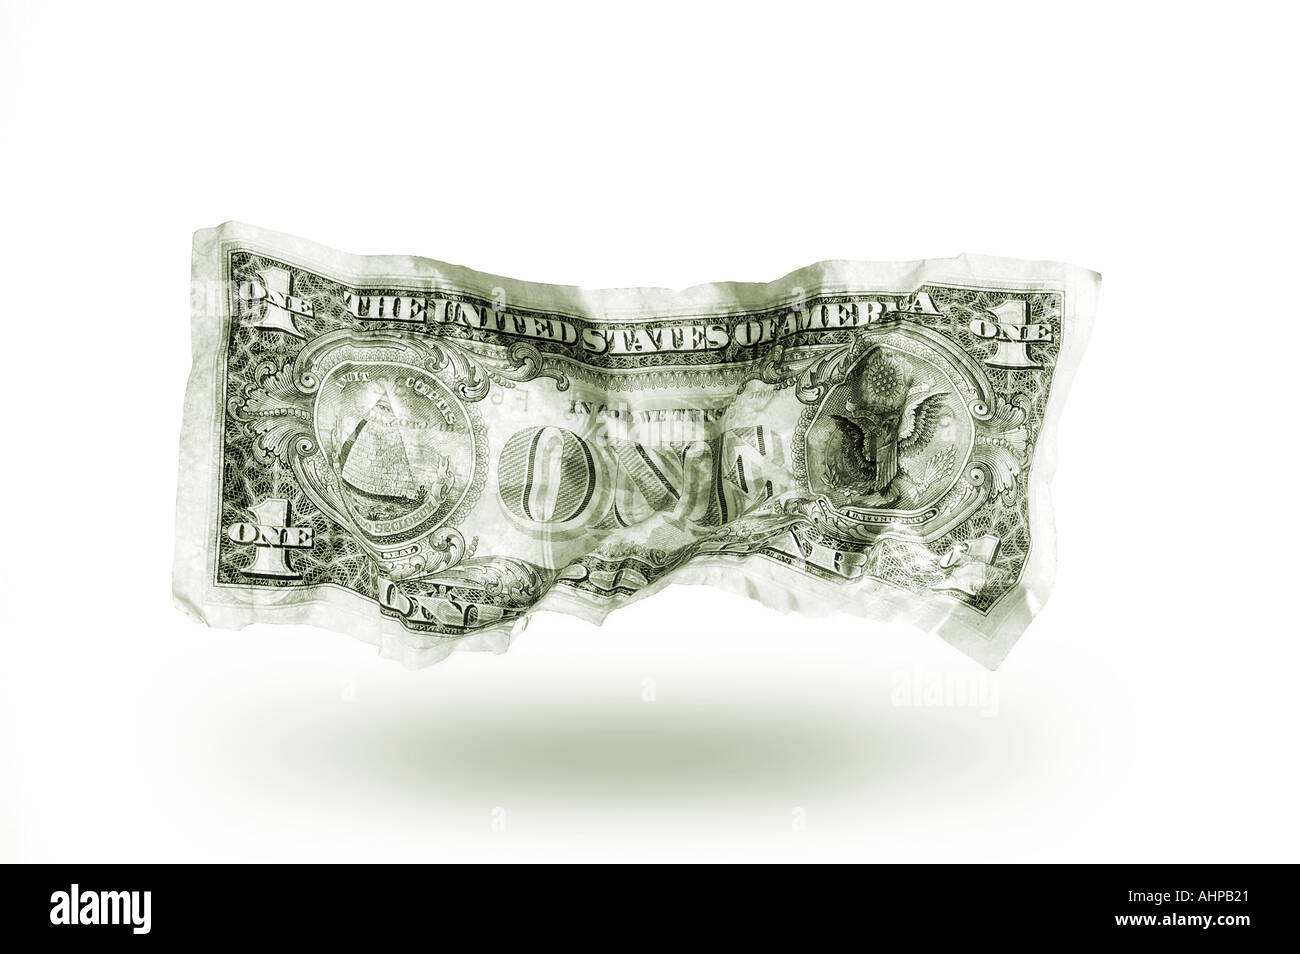 Dollar Bill US Currency note with white background and shadow Stock Photo